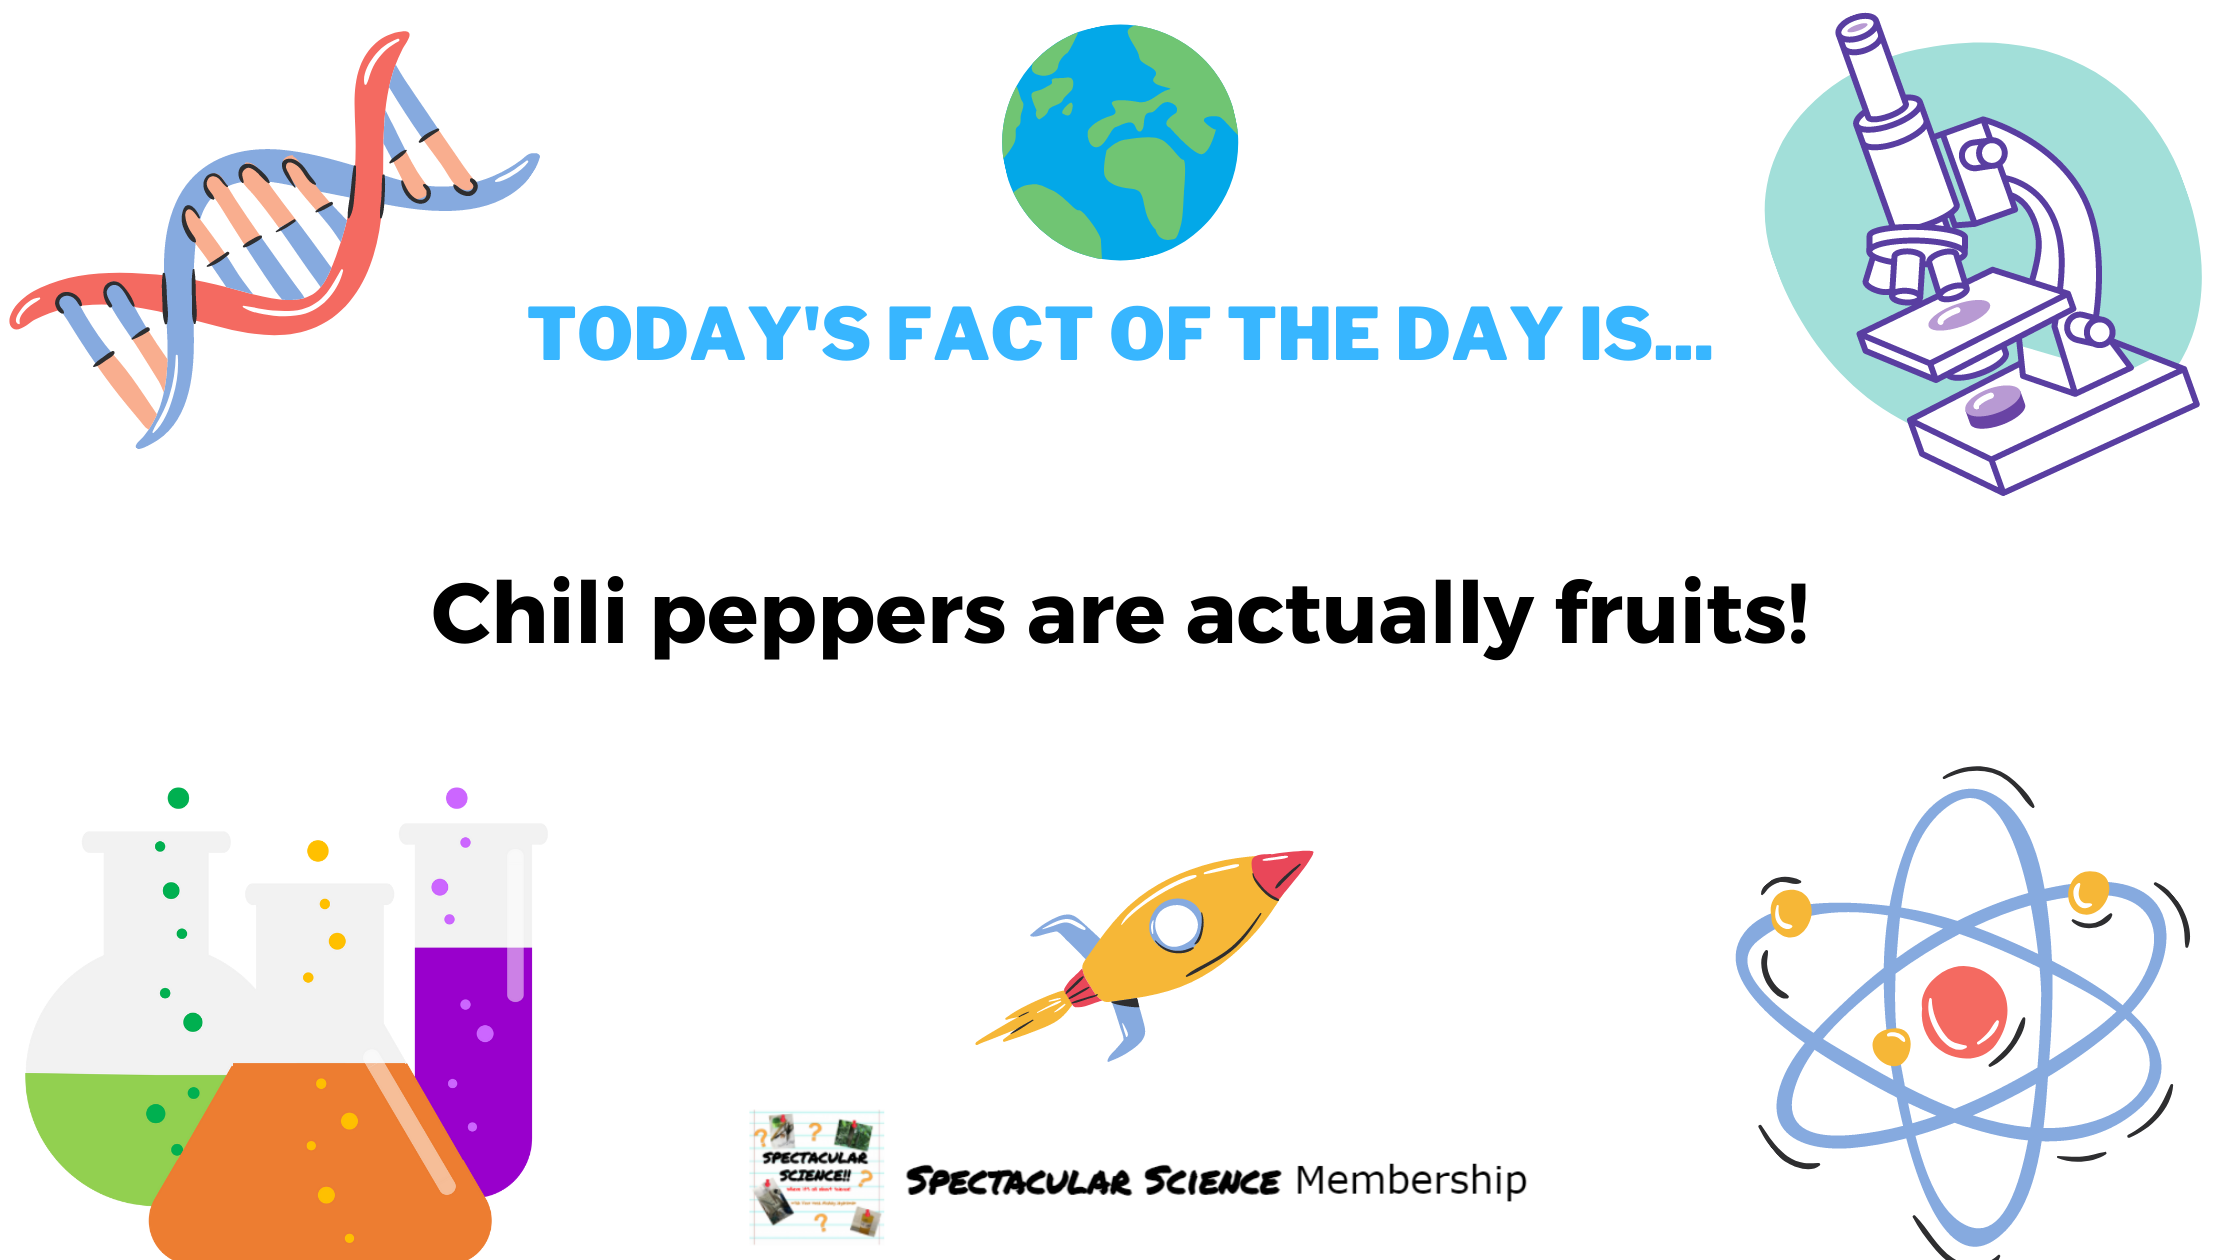 Fact of the Day Image Jan. 2nd